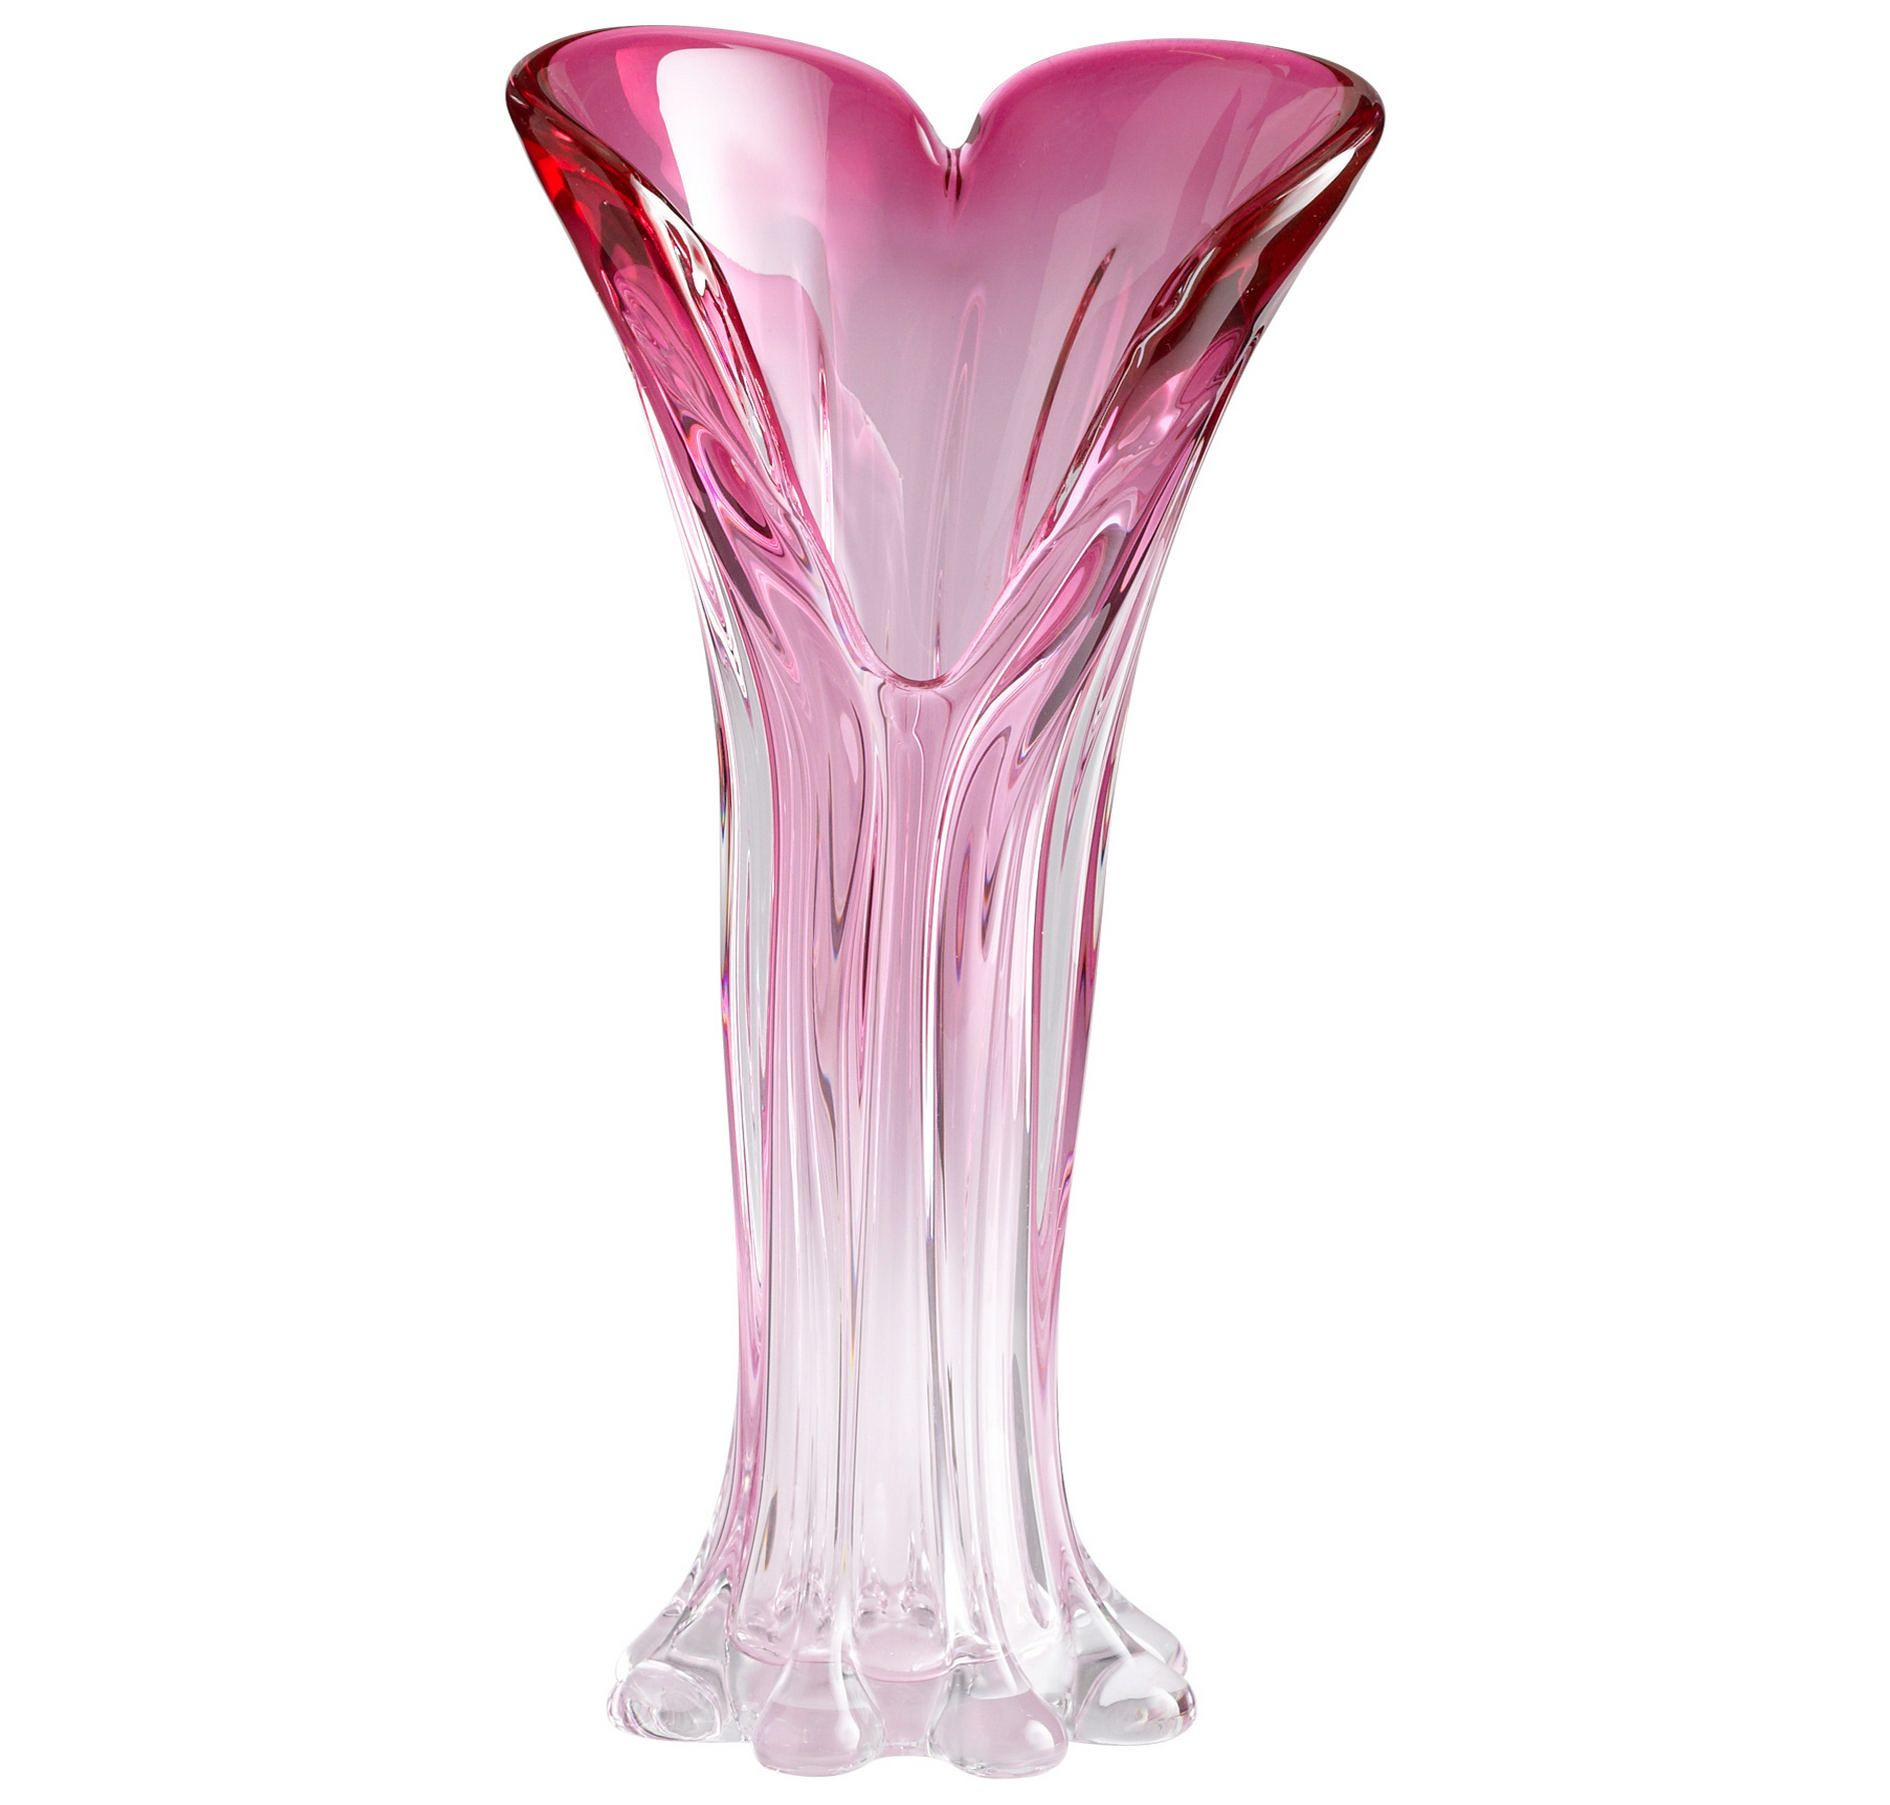 decorative crystal vases of cyan design 05388 large cuore vase in pink finish in home decor regarding cyan design 05388 large cuore vase in pink finish in home decor vases urns